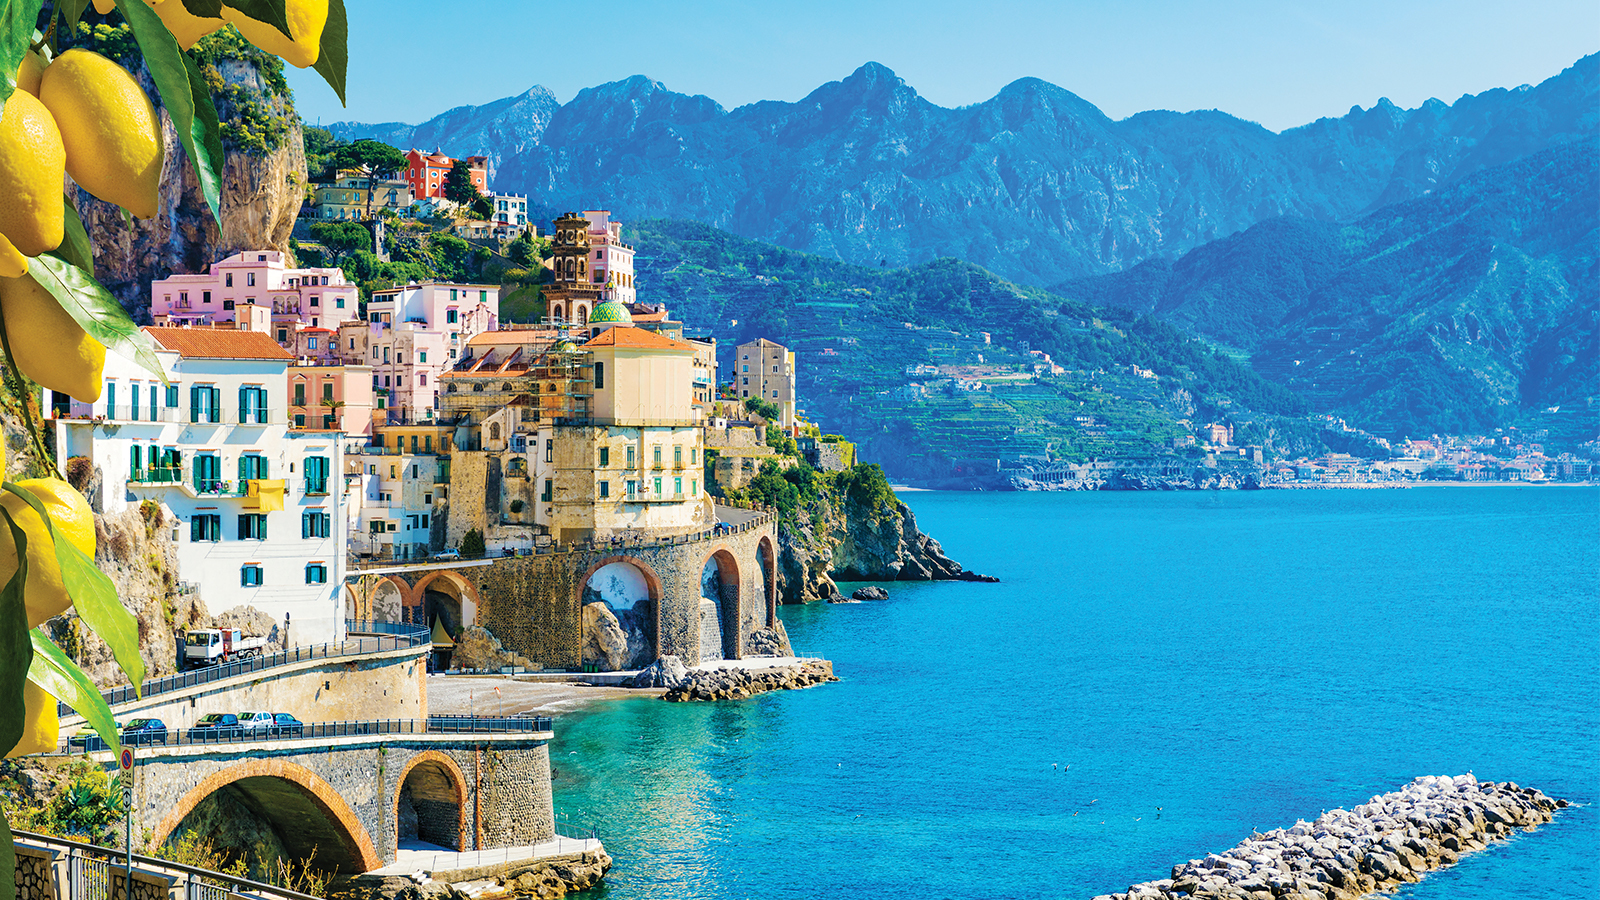 World of Cruising | Your guide to cruising the Mediterranean